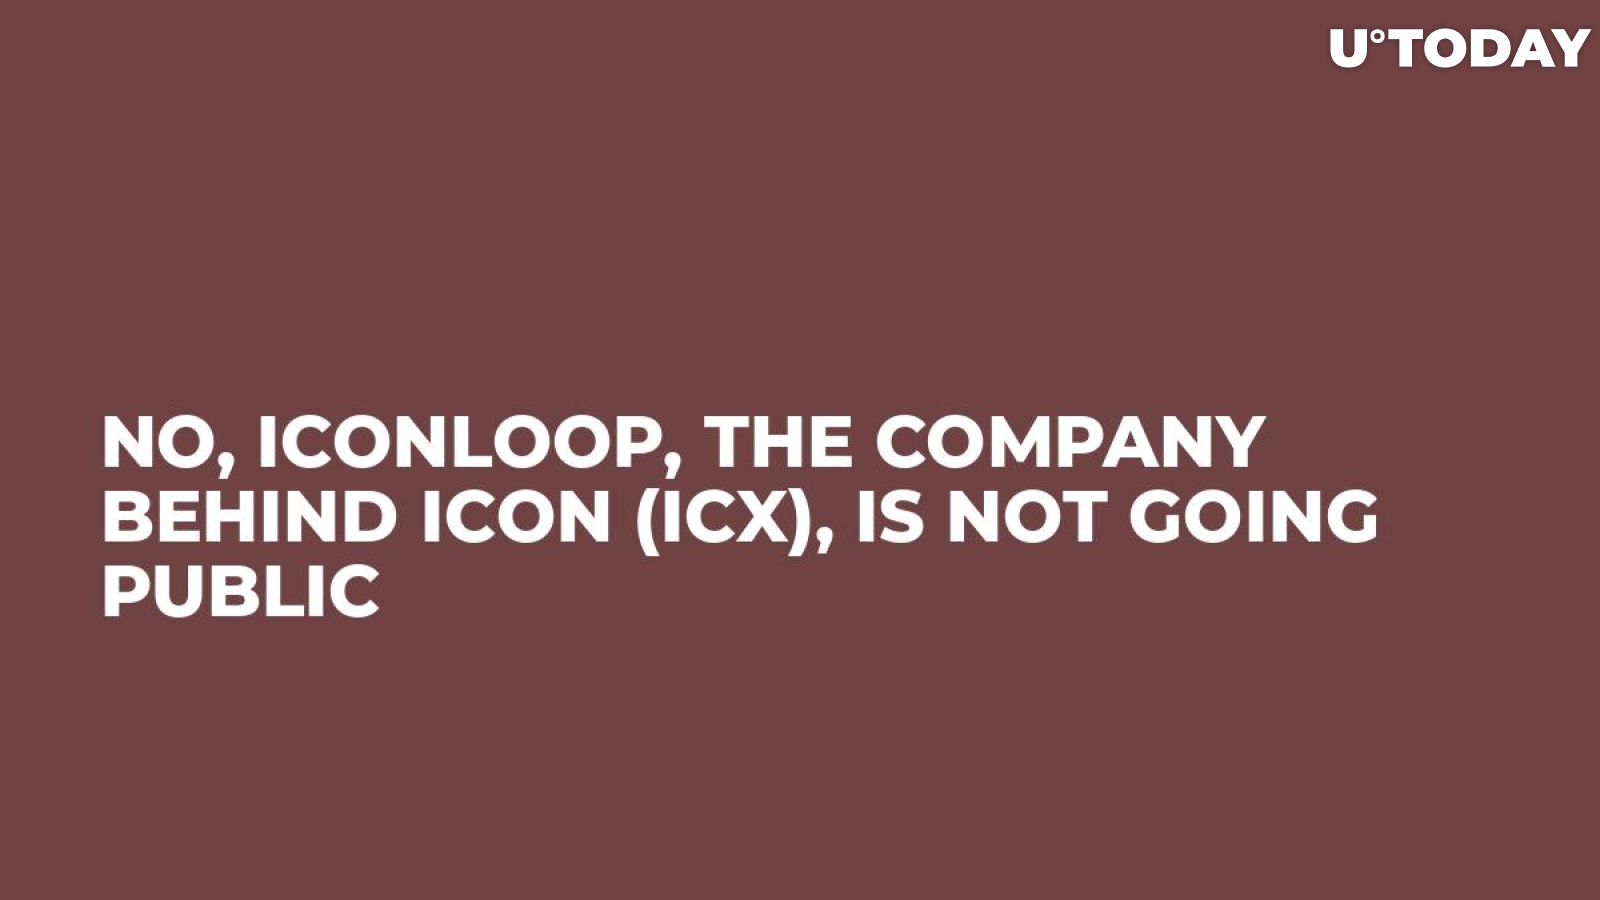 No, ICONLOOP, the Company Behind ICON (ICX), Is Not Going Public